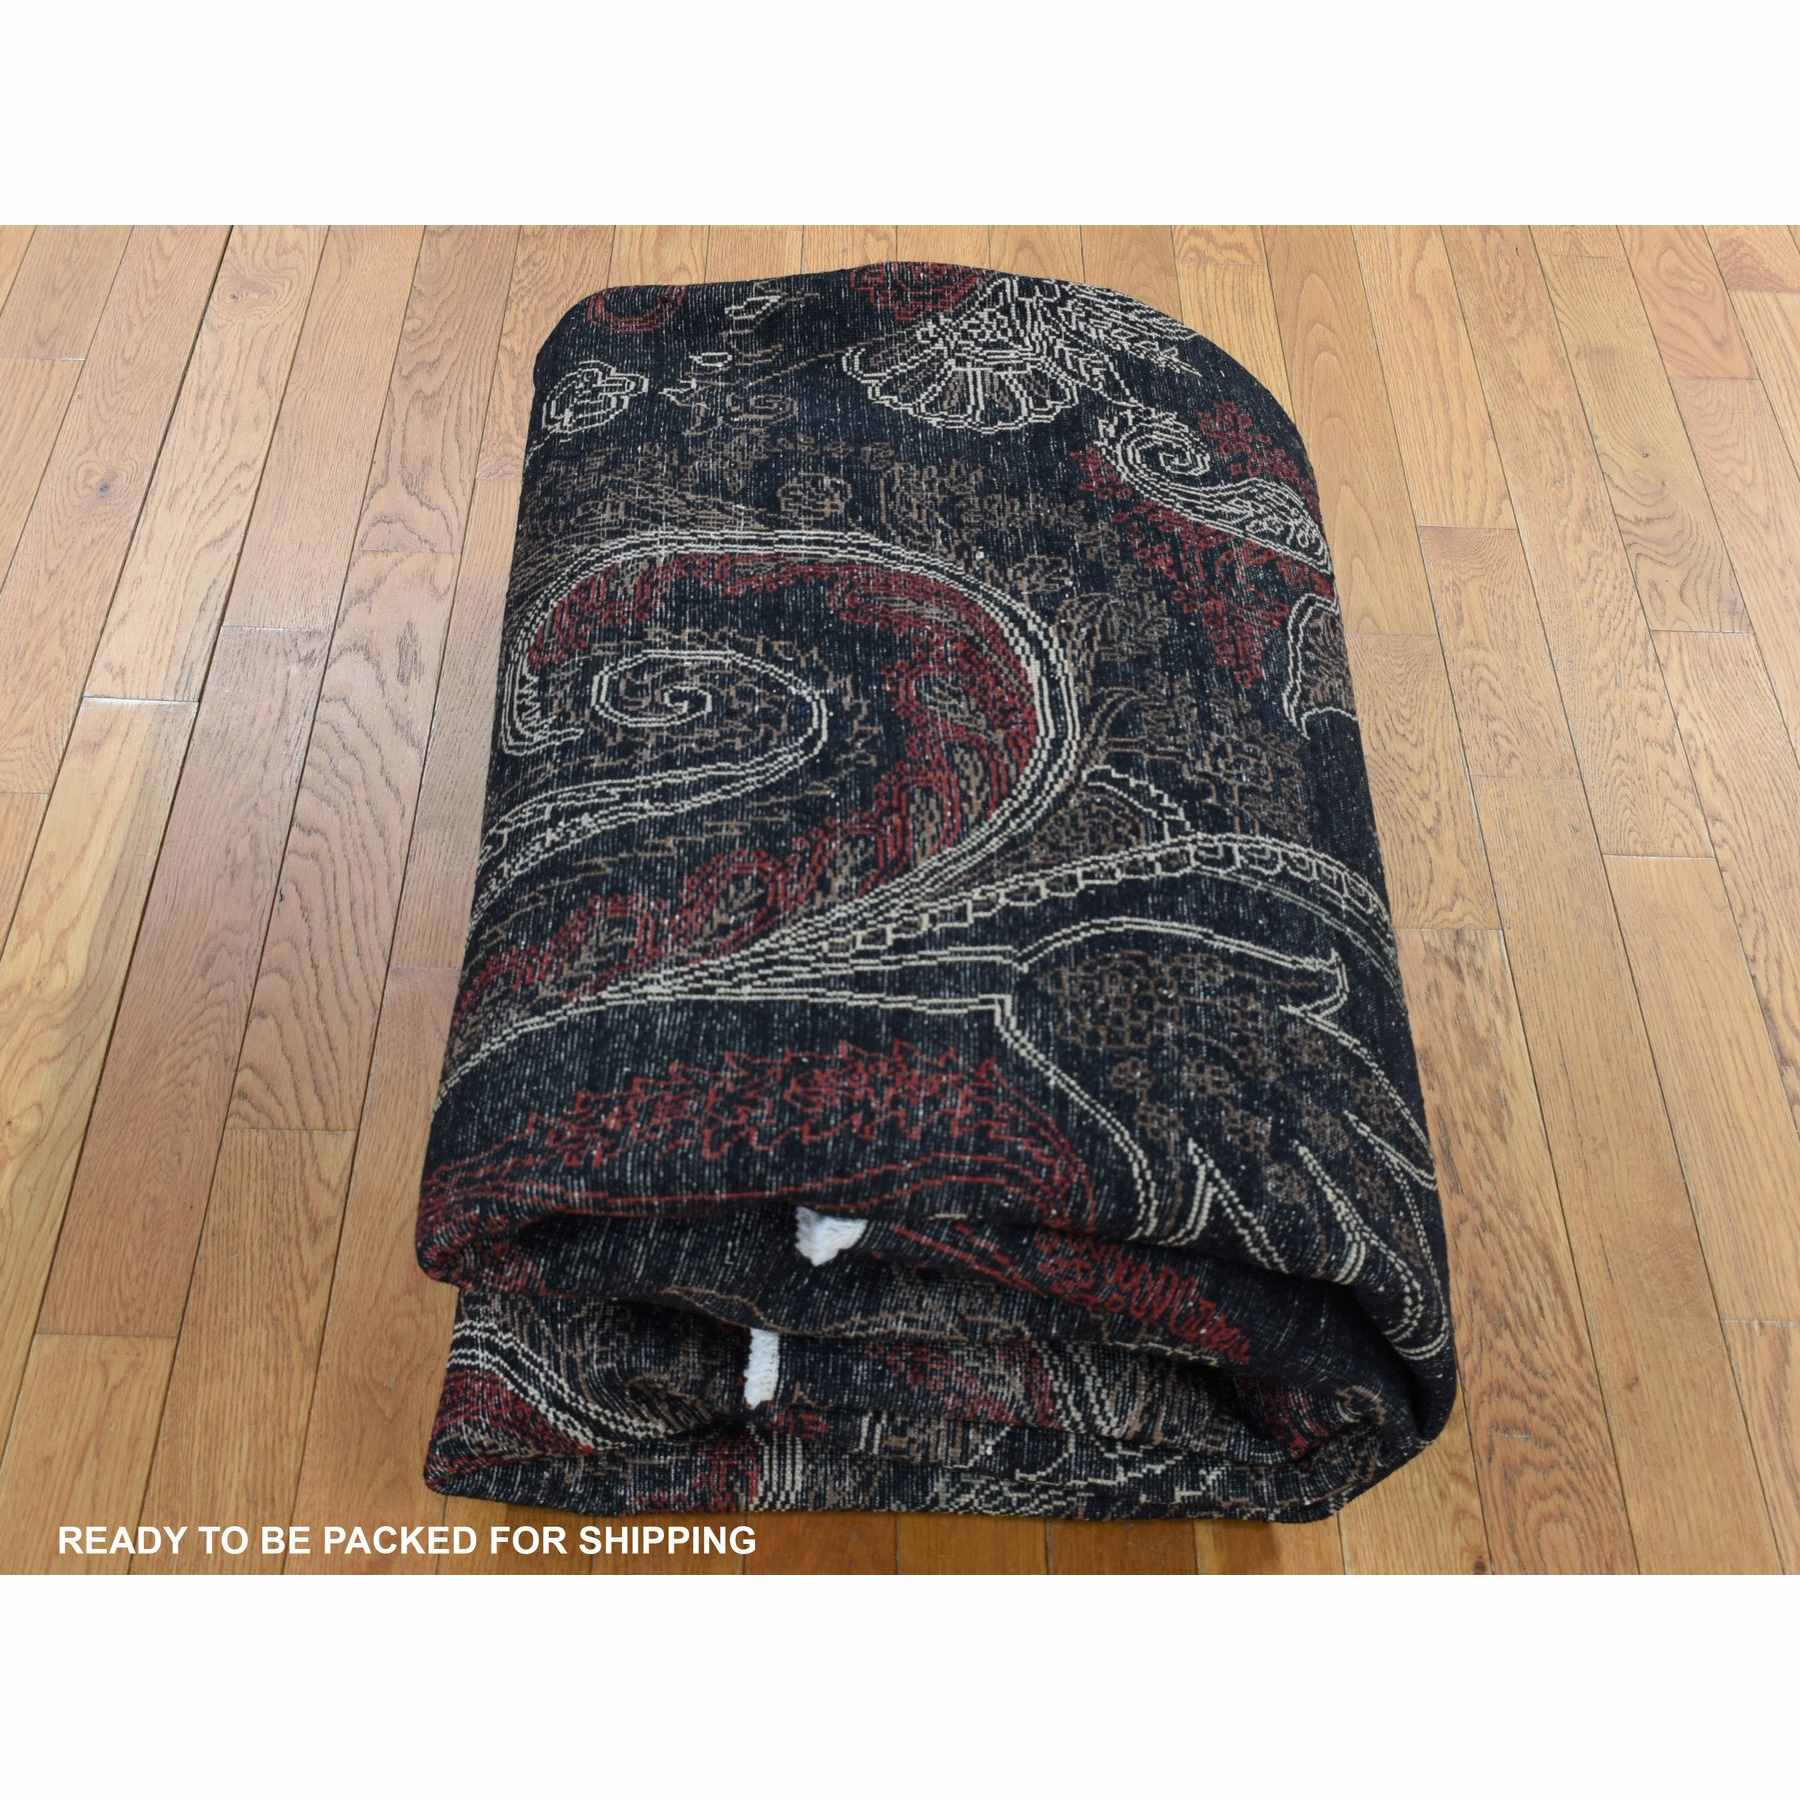 Modern-and-Contemporary-Hand-Knotted-Rug-435145